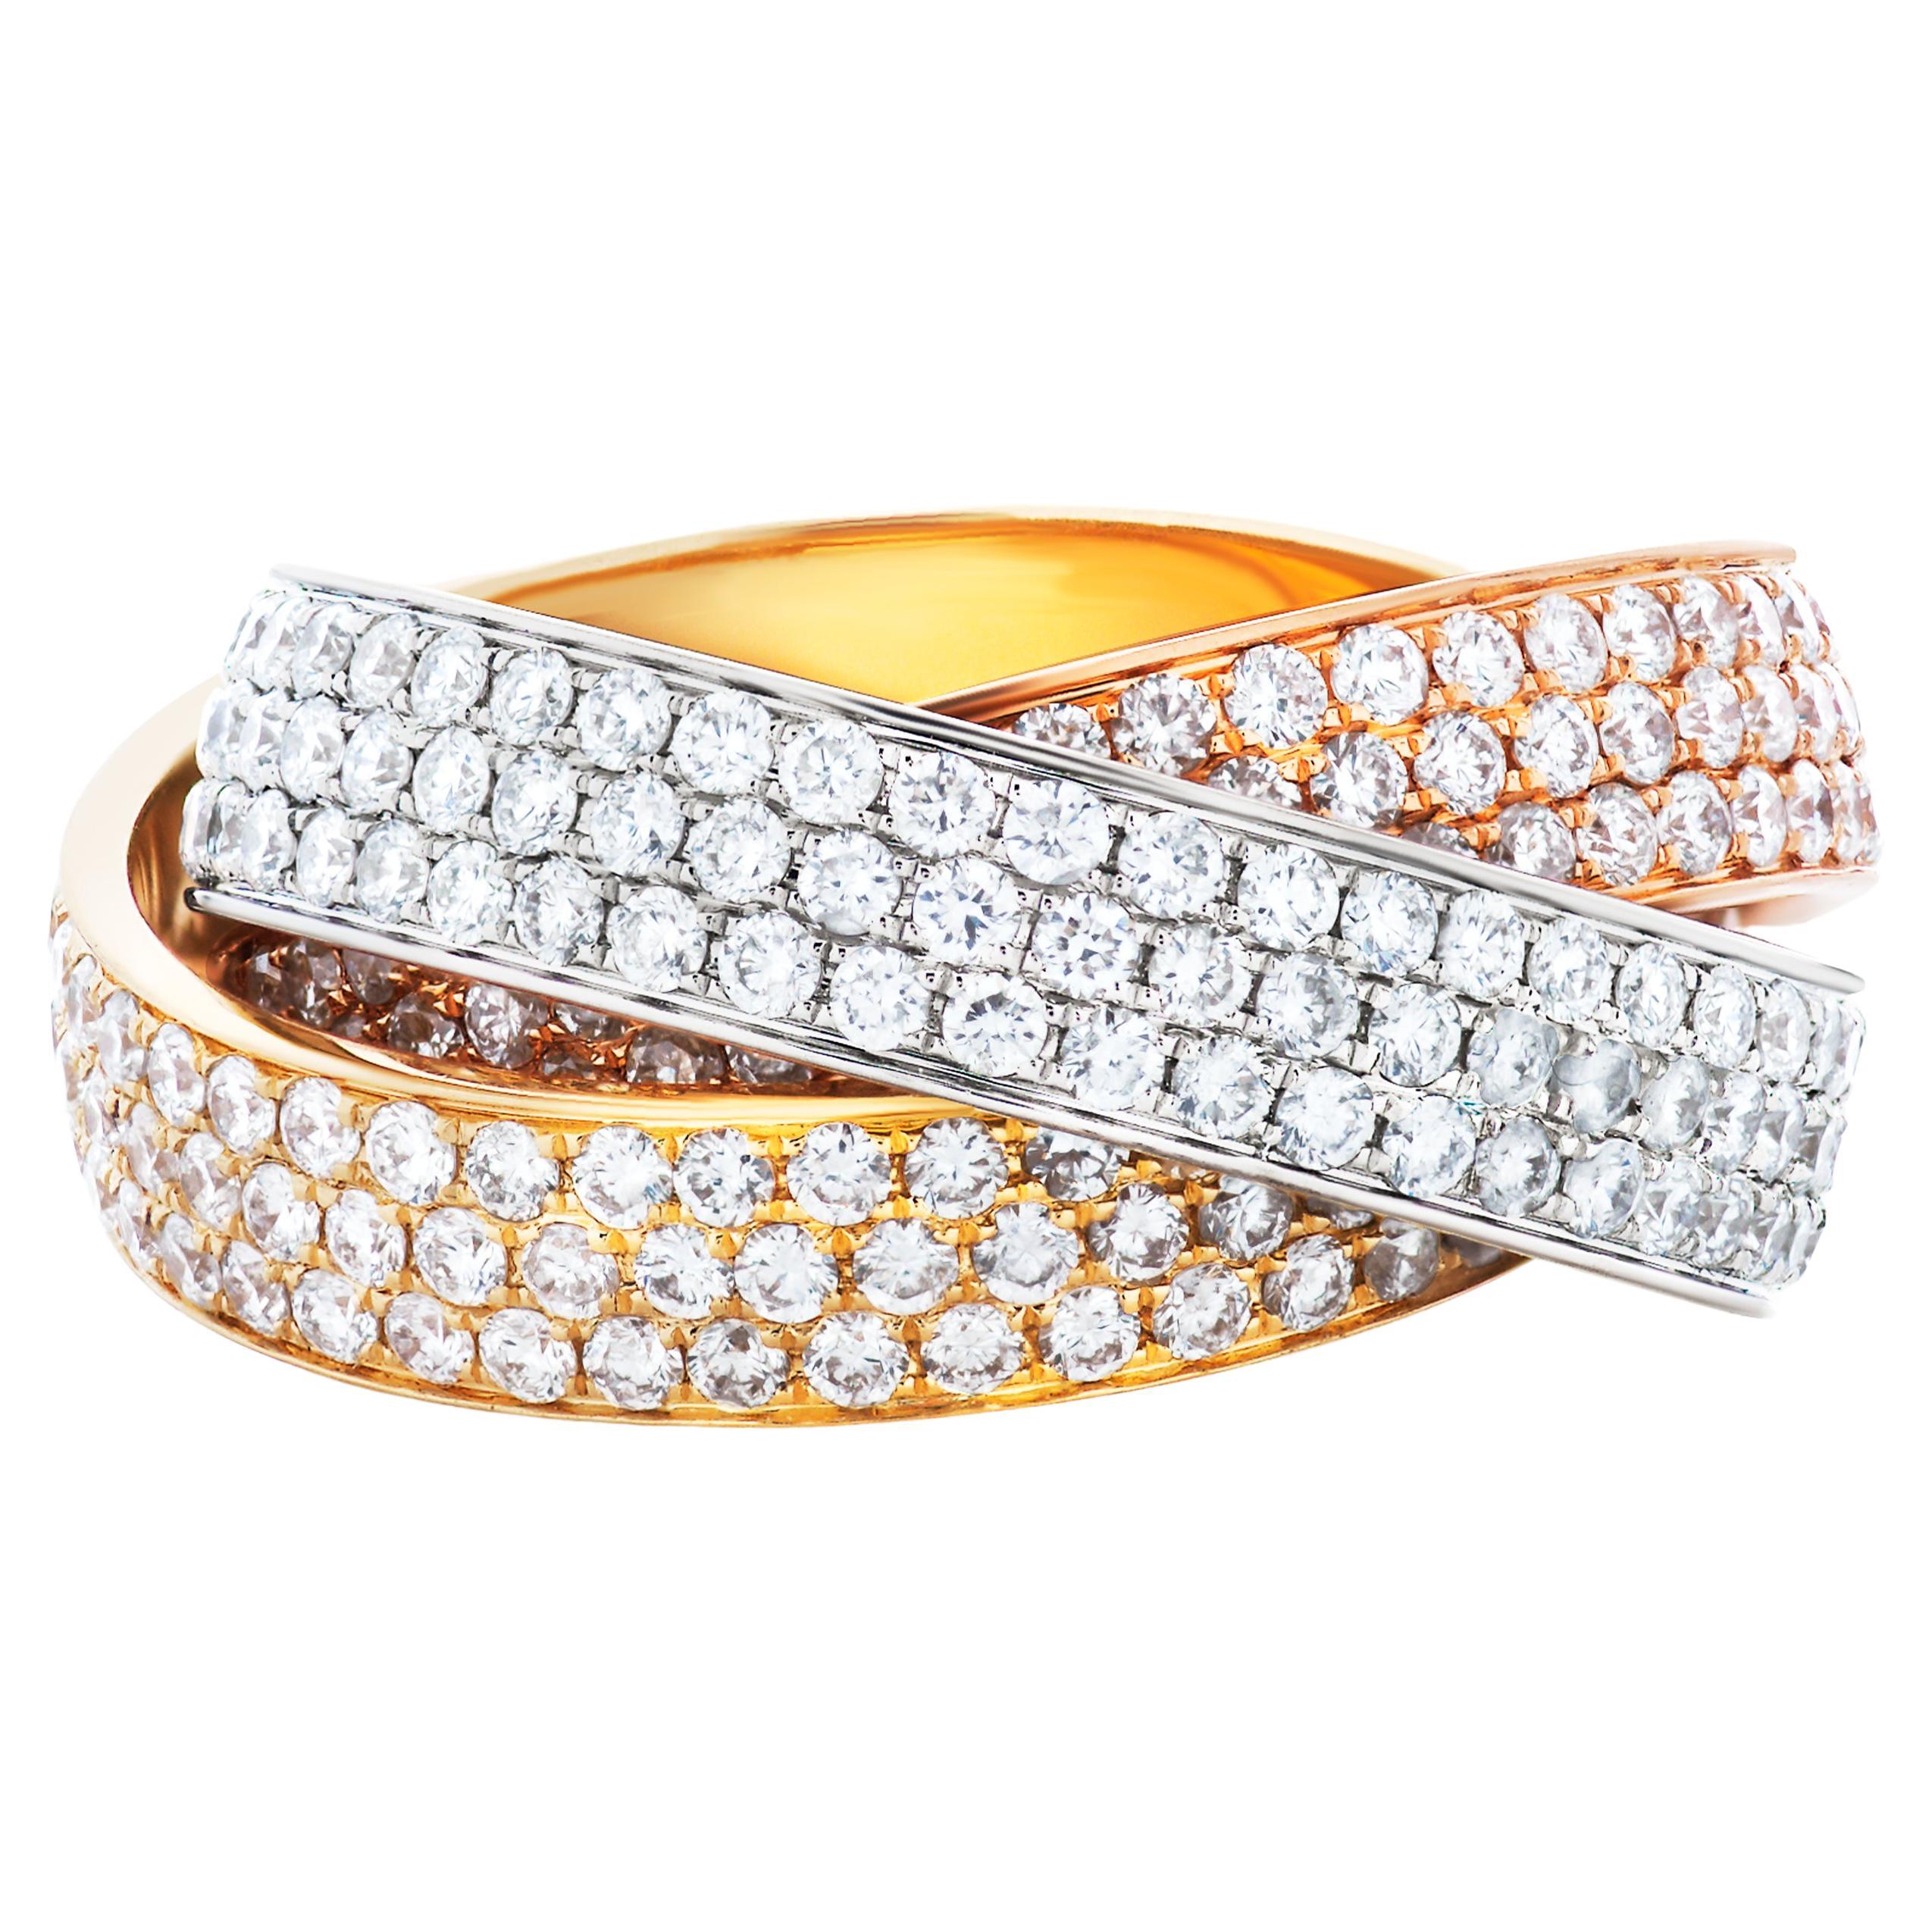 Cartier Large Model Diamond Trinity Ring in 18k White, Yellow and Rose Gold For Sale